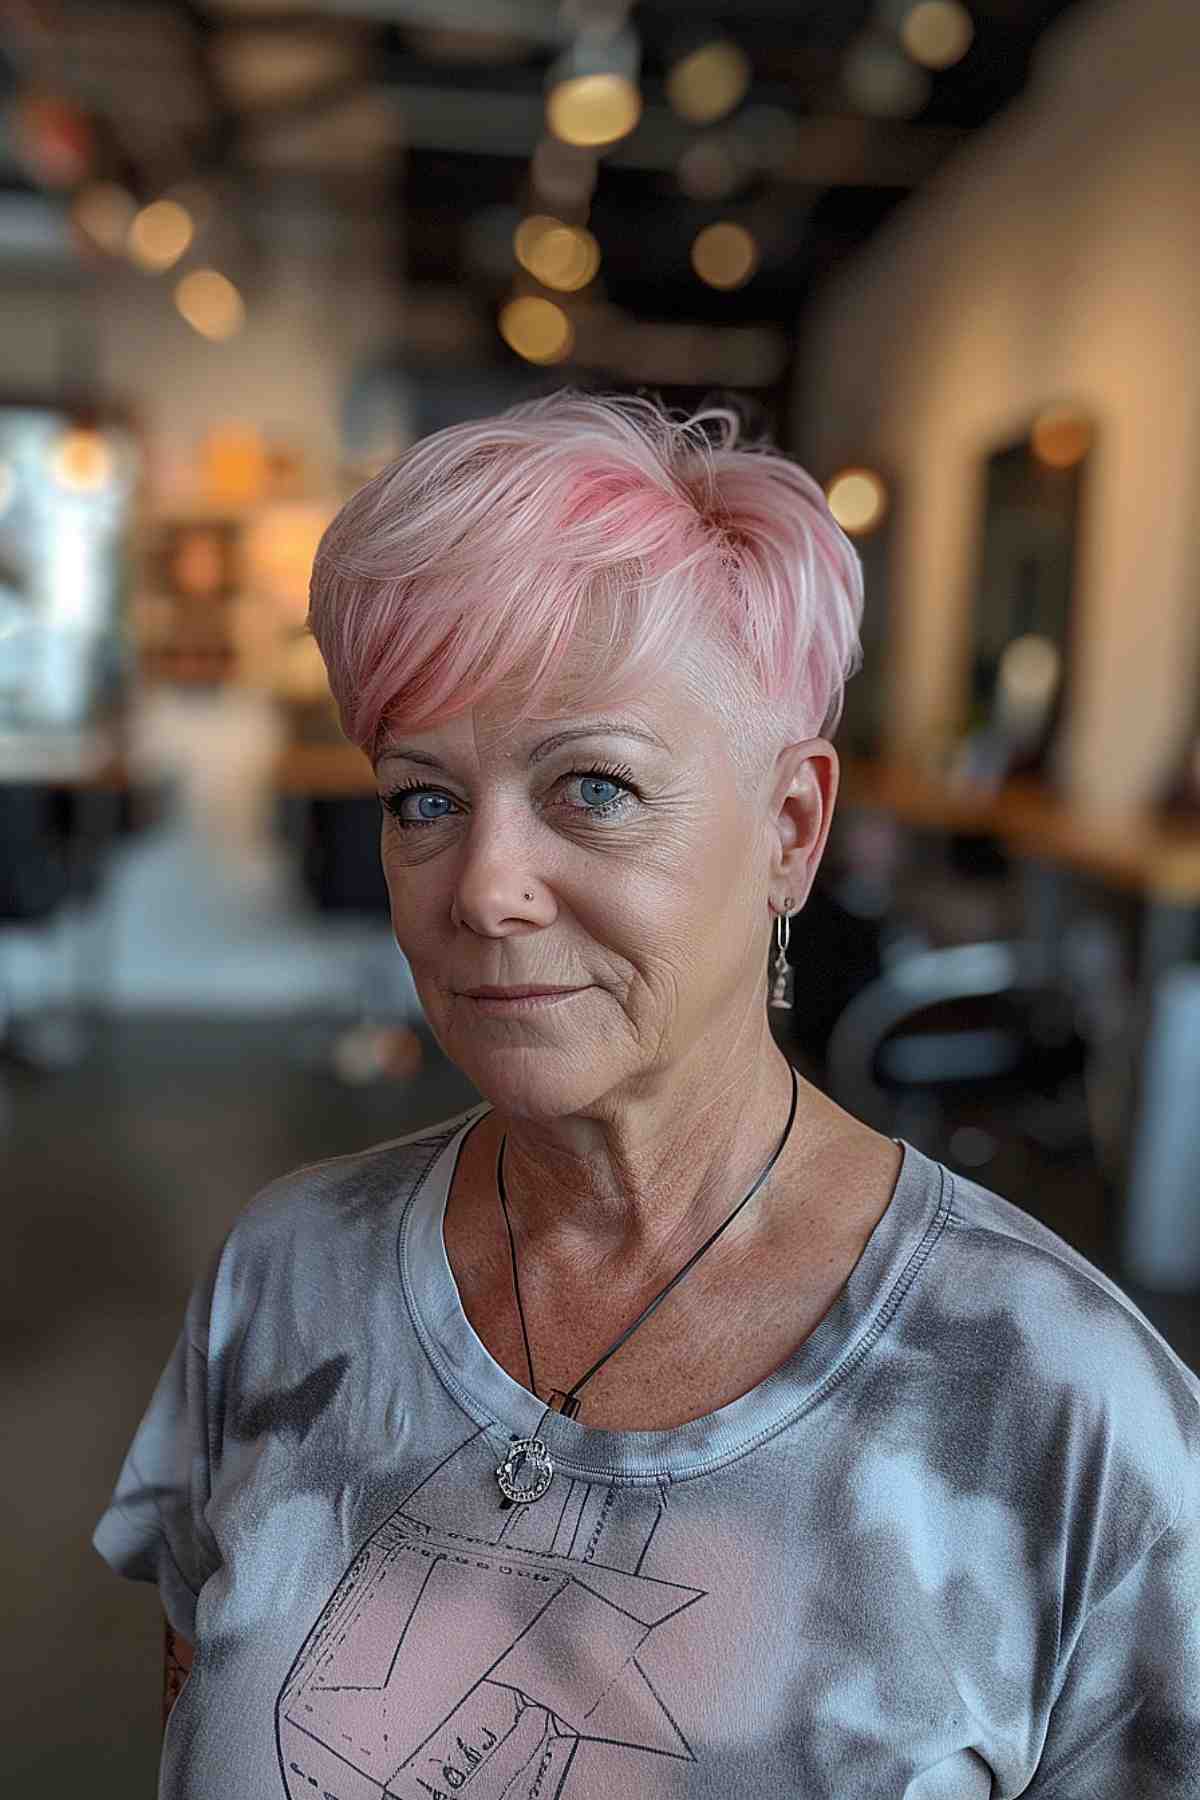 Senior Woman with Short Pink Pixie Hairstyle